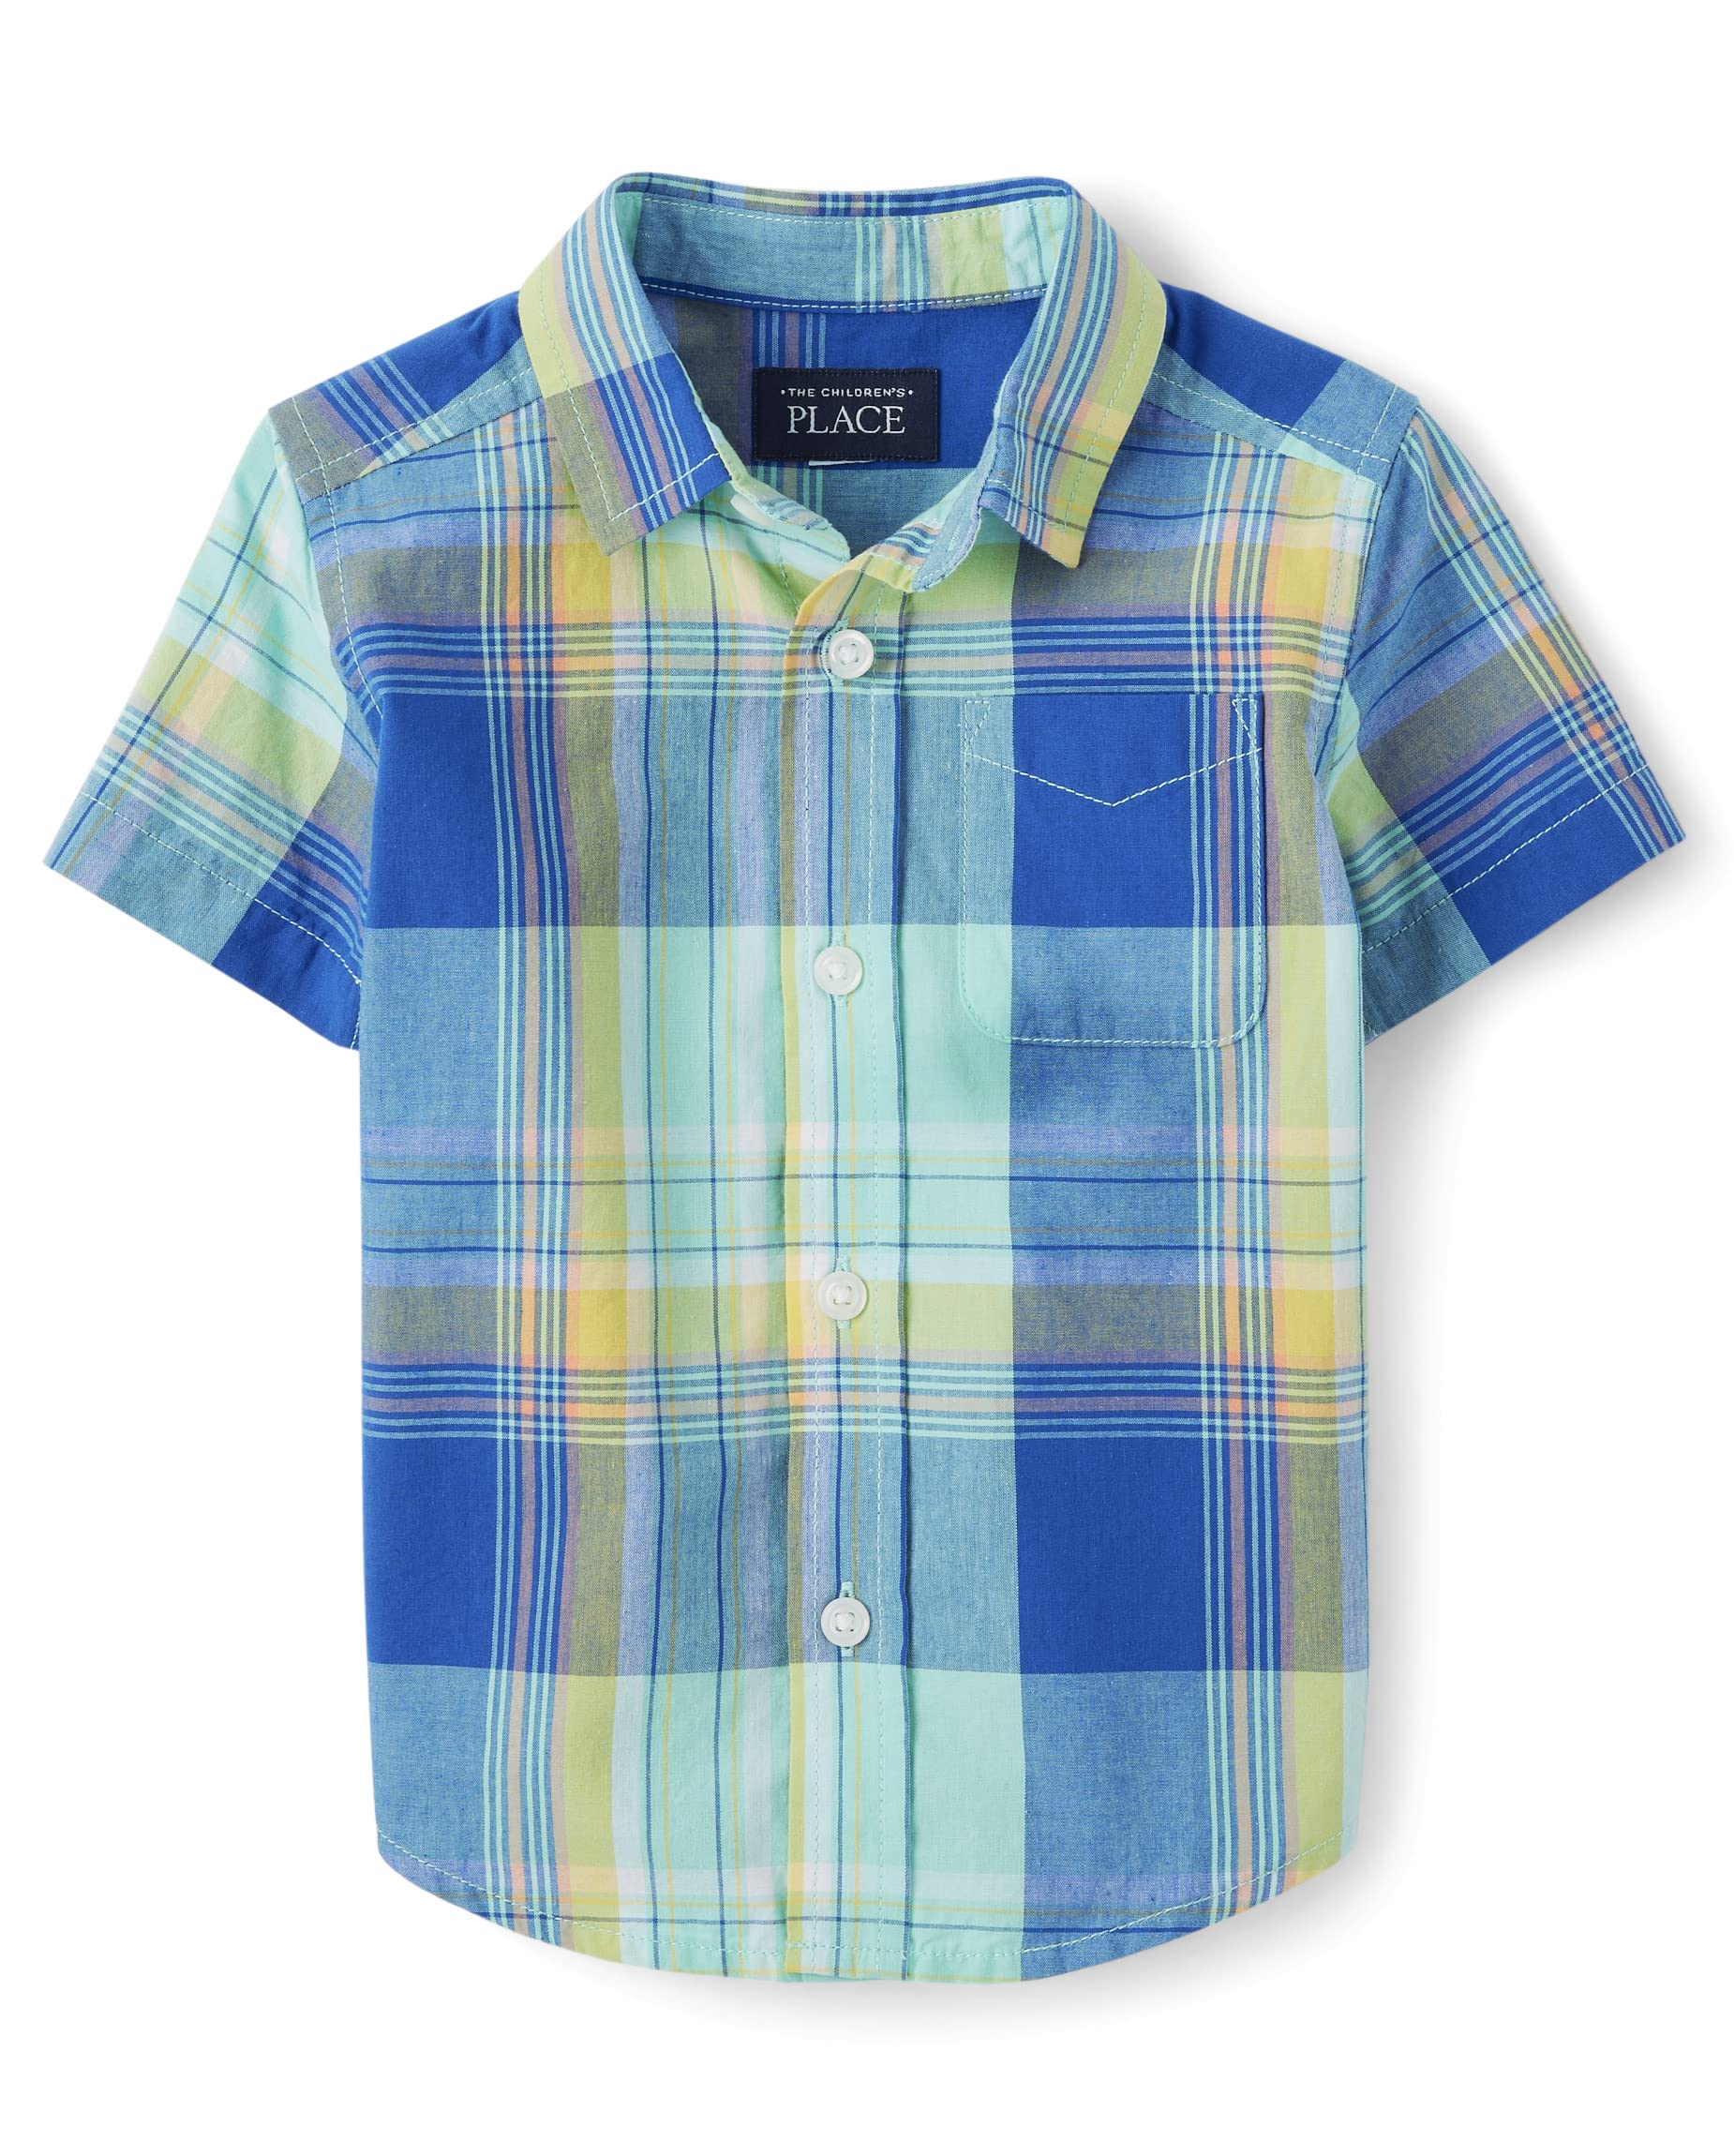 The Children's Place baby boys Short Sleeve Button Down Shirt